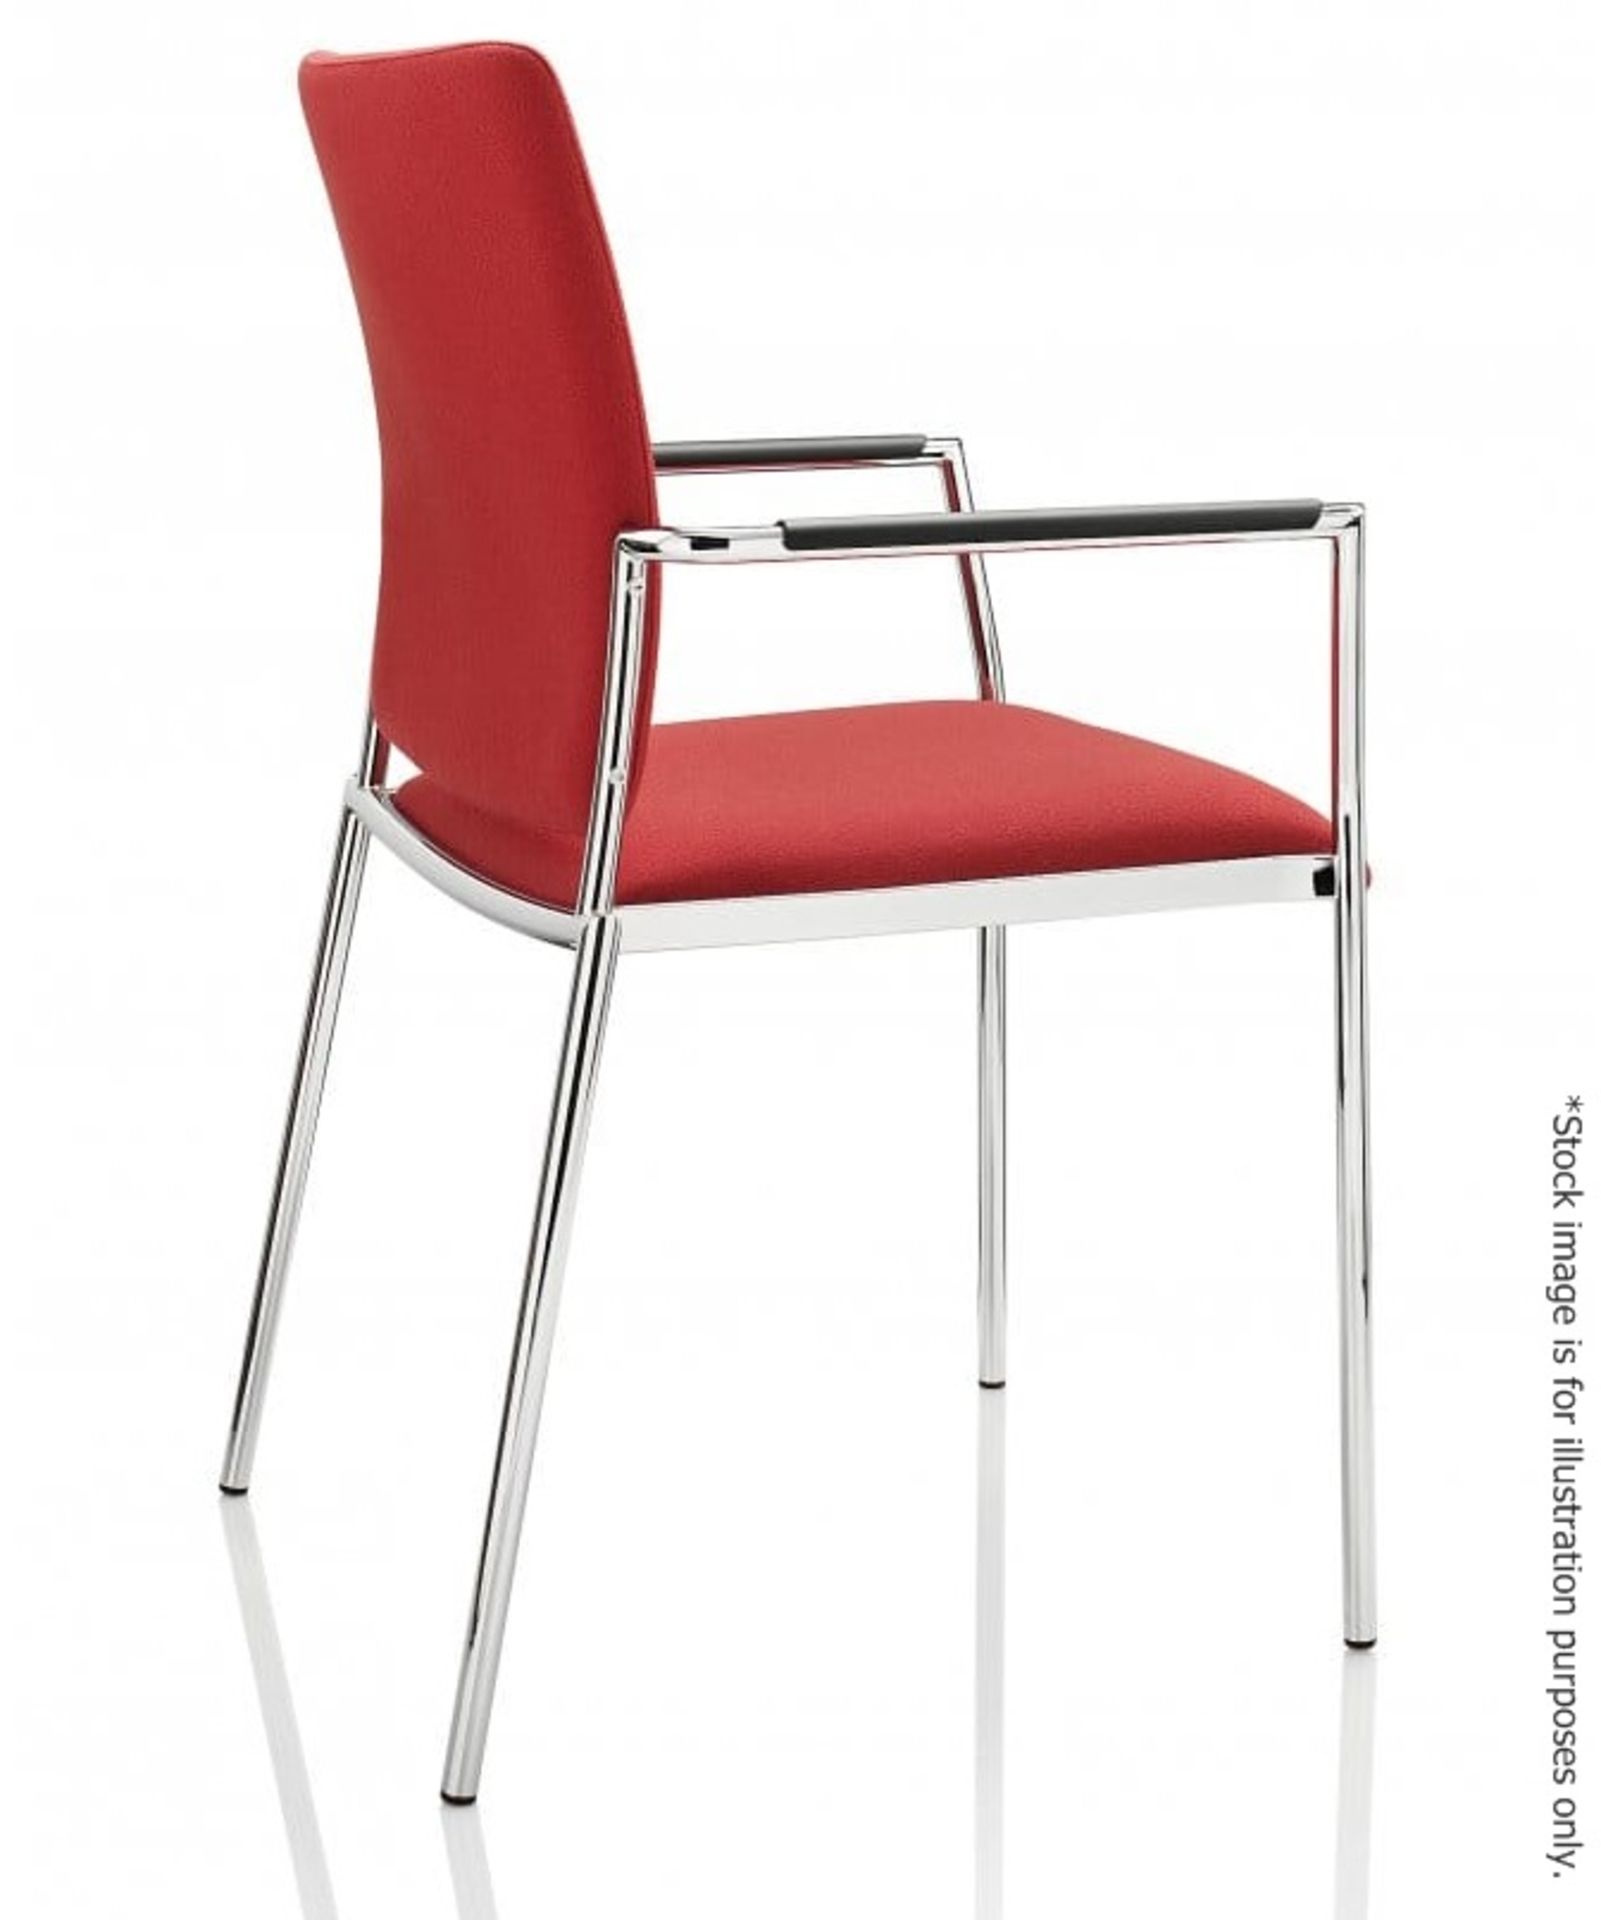 A Pair Of CARLO Stacking Chairs With Arms In Chromed Steel - NO VAT ON THE HAMMER